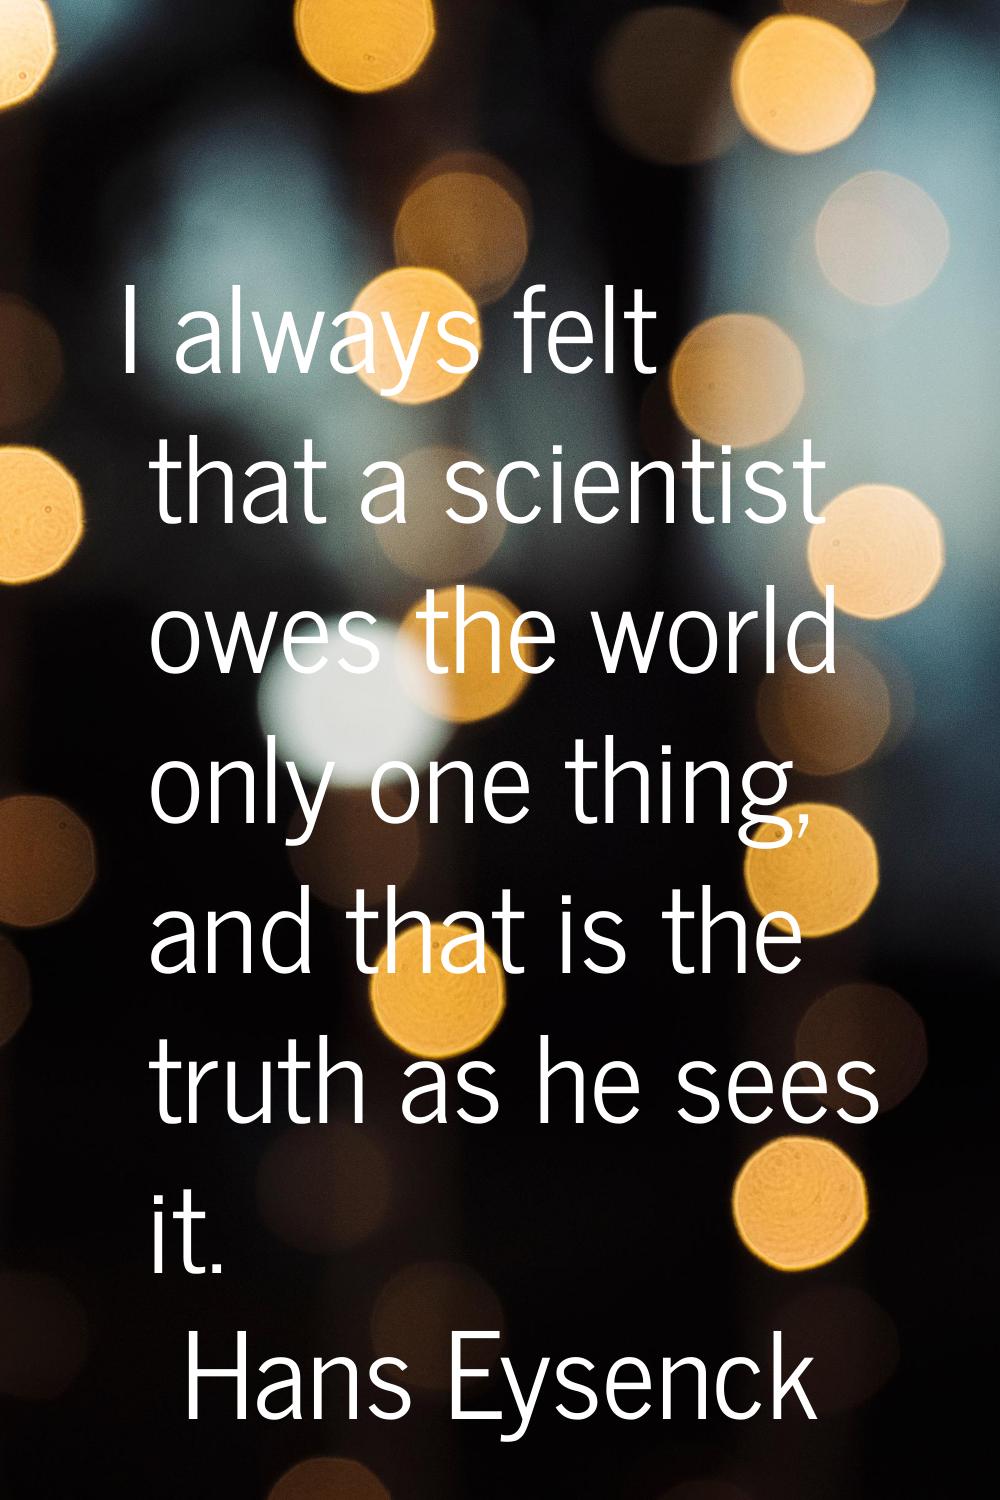 I always felt that a scientist owes the world only one thing, and that is the truth as he sees it.